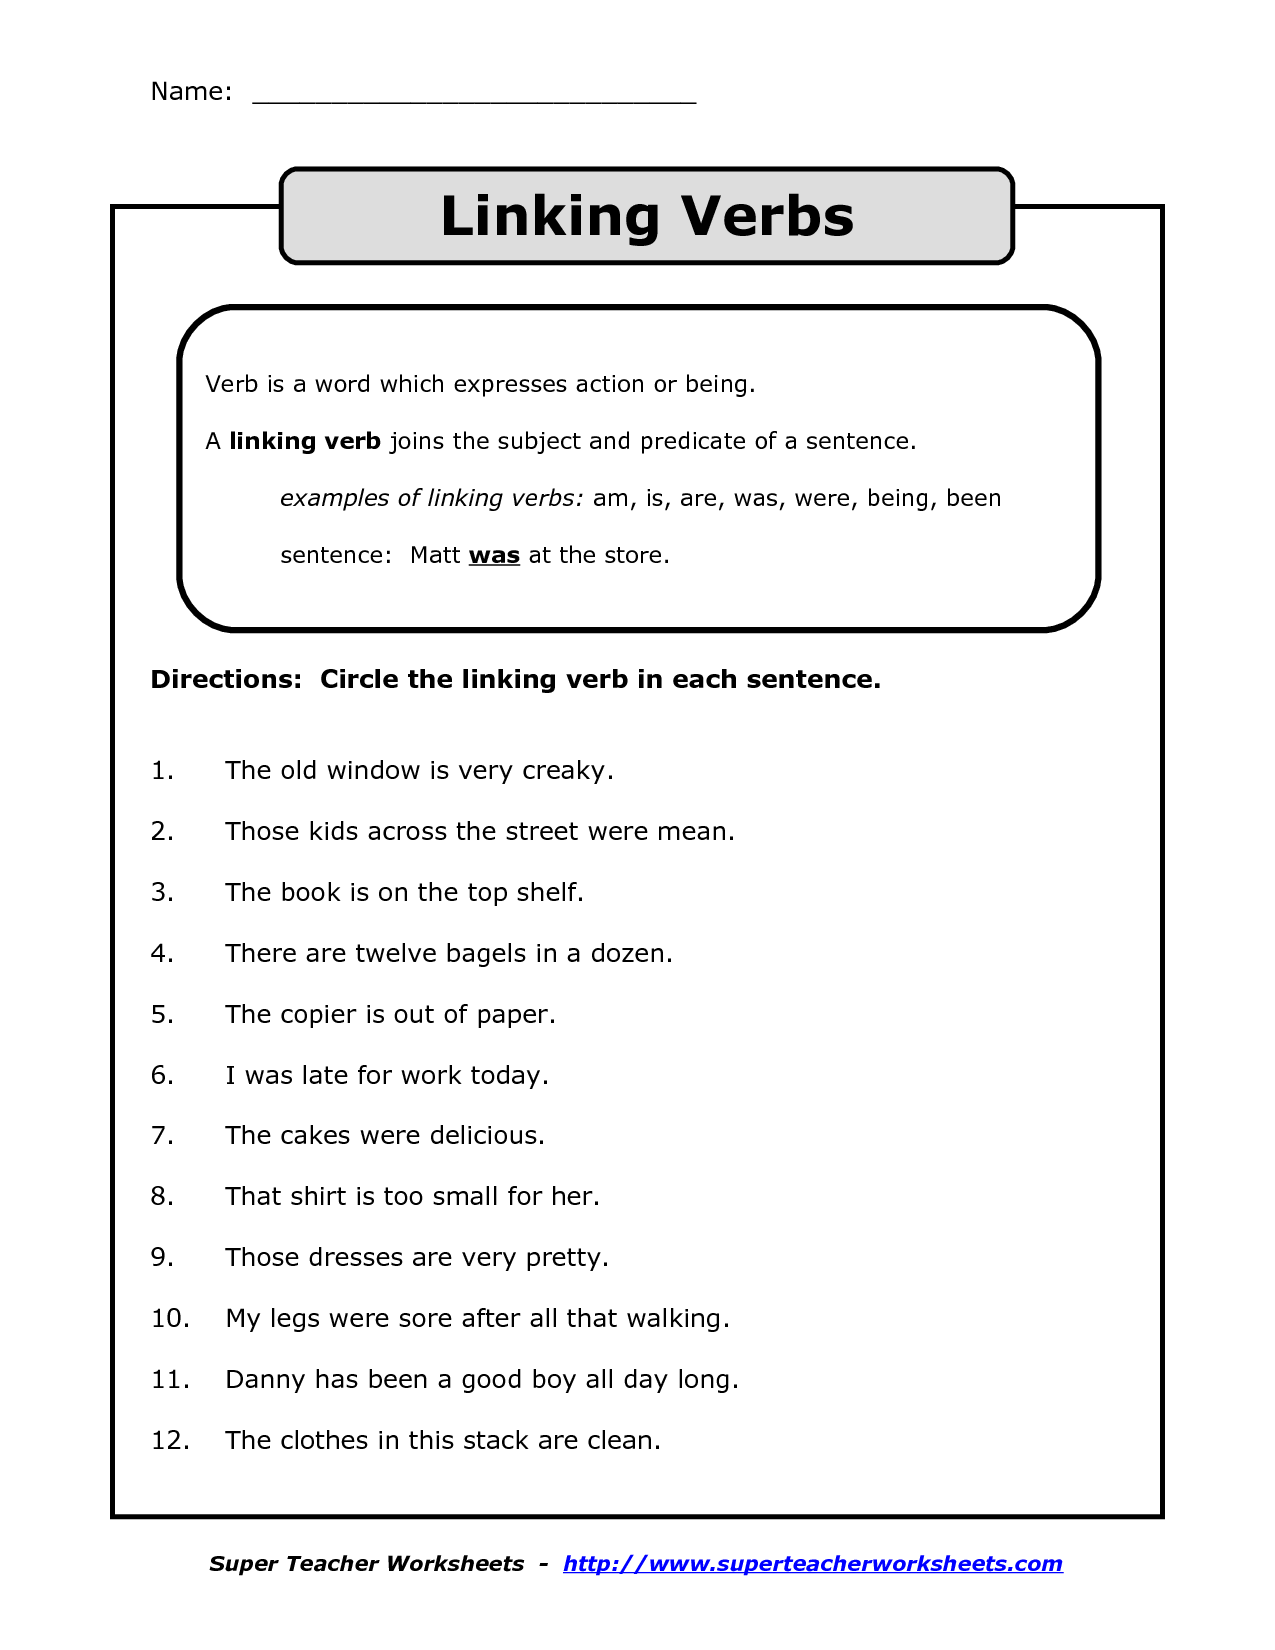 16 Best Images Of Action Verb Linking Verb Worksheet Action And Linking Verbs Worksheets